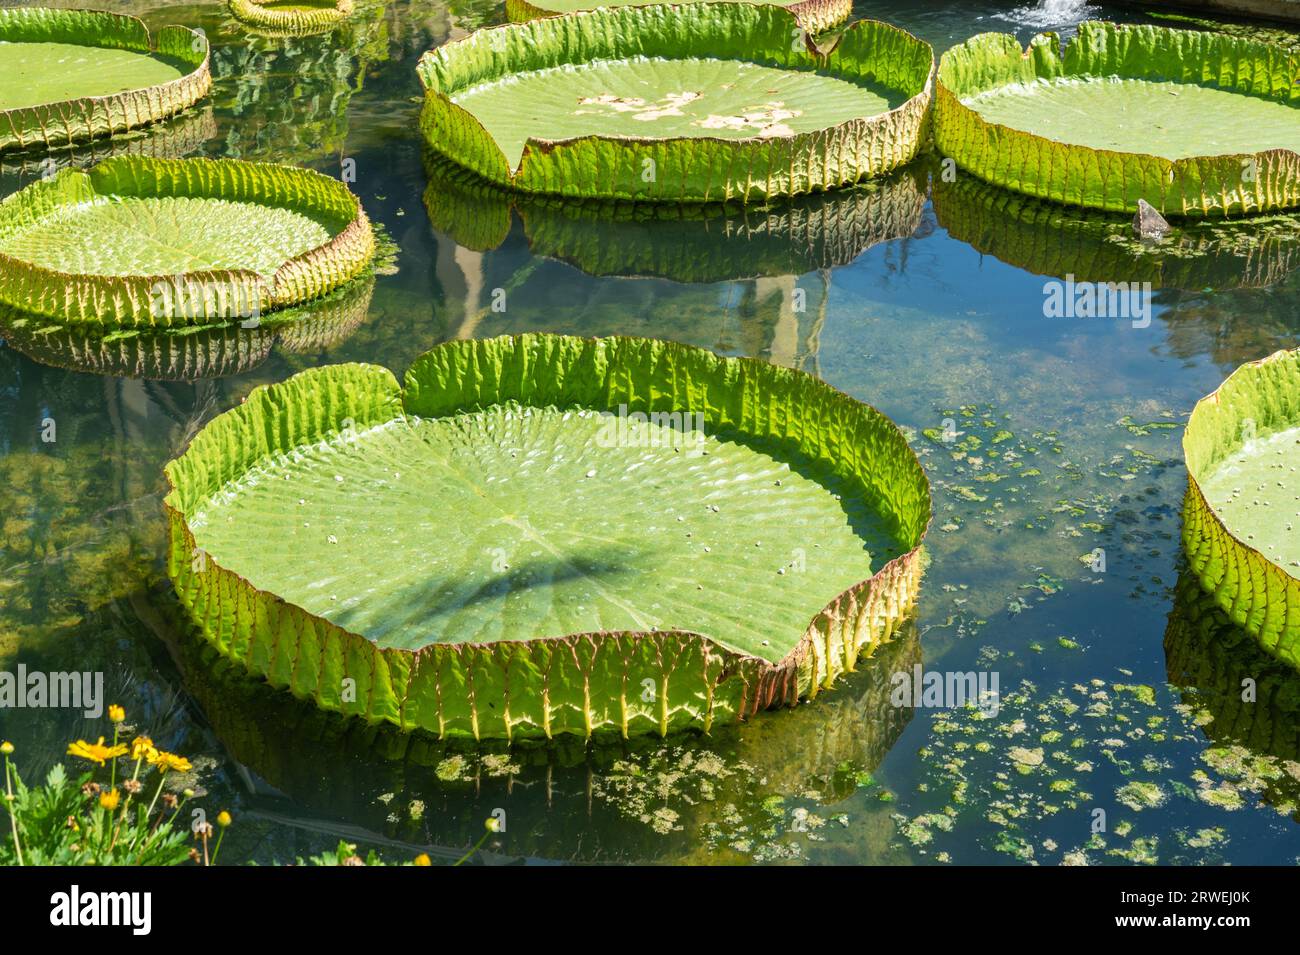 Pond with duckweed and lily leaves Stock Photo